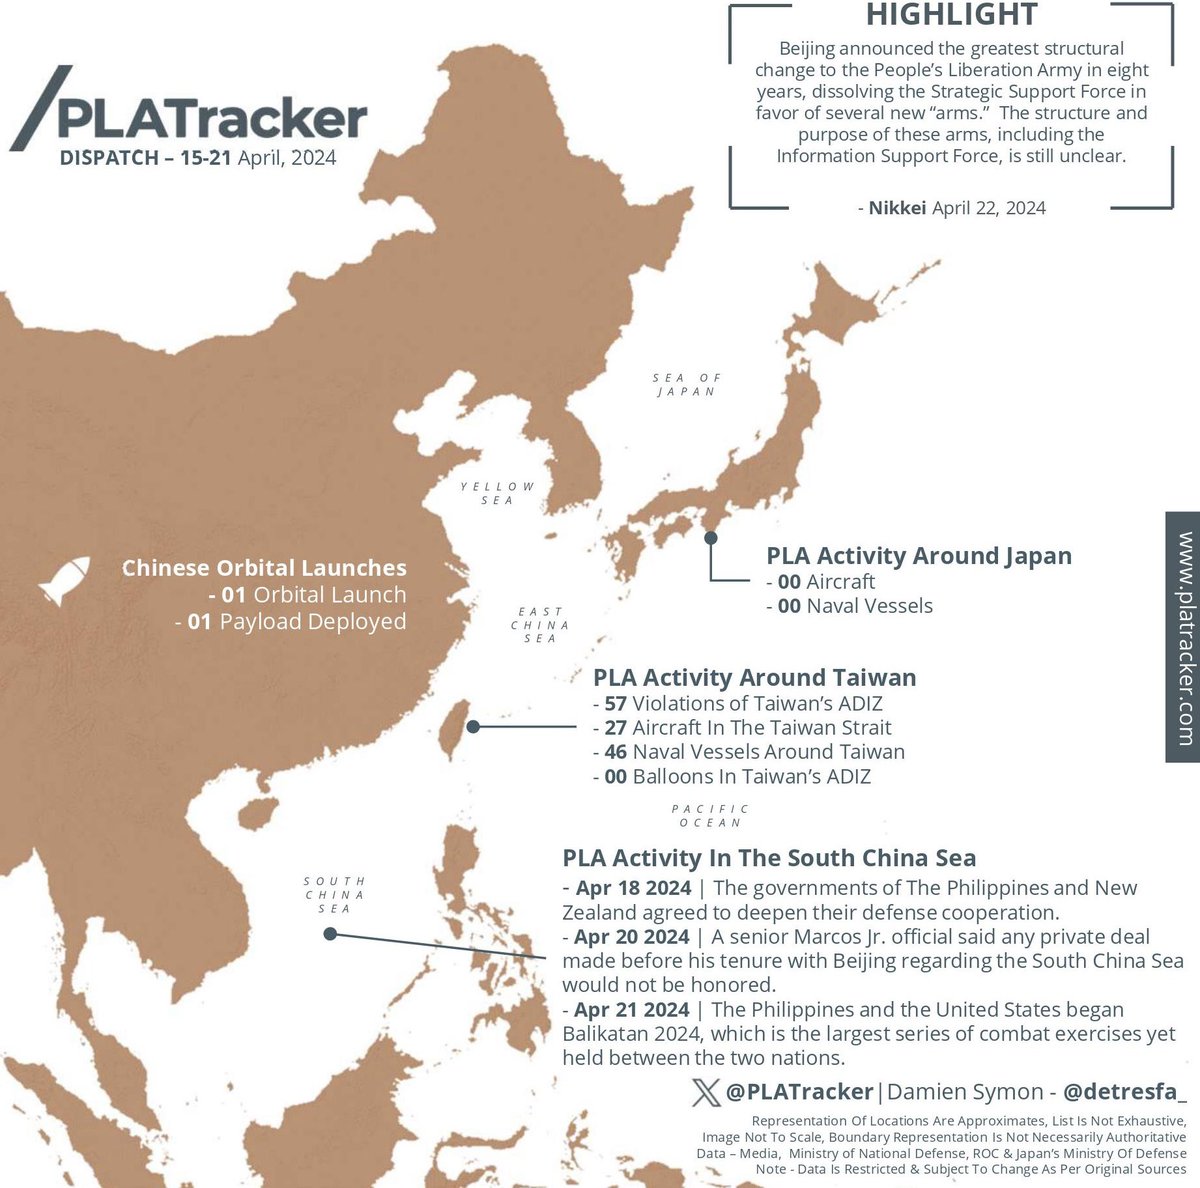 PLATracker DISPATCH 15 - 21 April 2024 Partnering with @detresfa_ we track sustained, high levels of PLA activity around Taiwan, key developments involving the Philippines, and more: